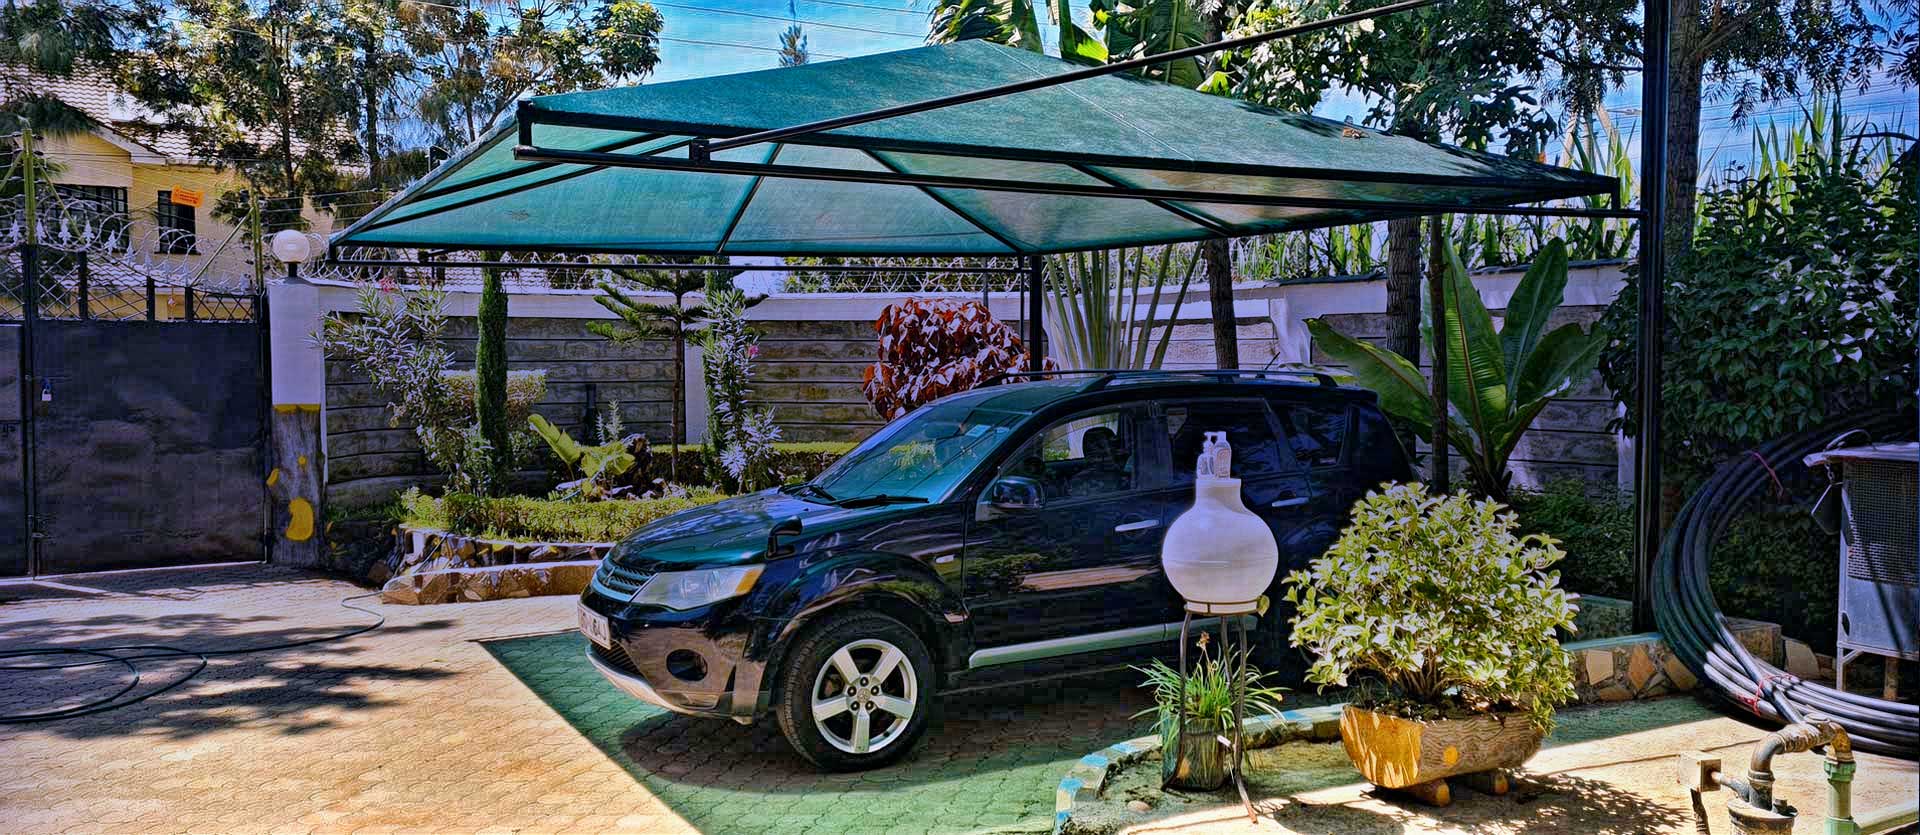 CARPORT-PARKING SHADE-WATERPROOF CAR SHADE-CAR WASH SHADE-VEHICLE PARKING SHADES FOR COMMERCIAL AND RESIDENTIAL USE-PARKING SHADE CANOPY-SHADENET PARKING COVER-BENEFITS OF INSTALLING PARKING SHADES IN KENYA